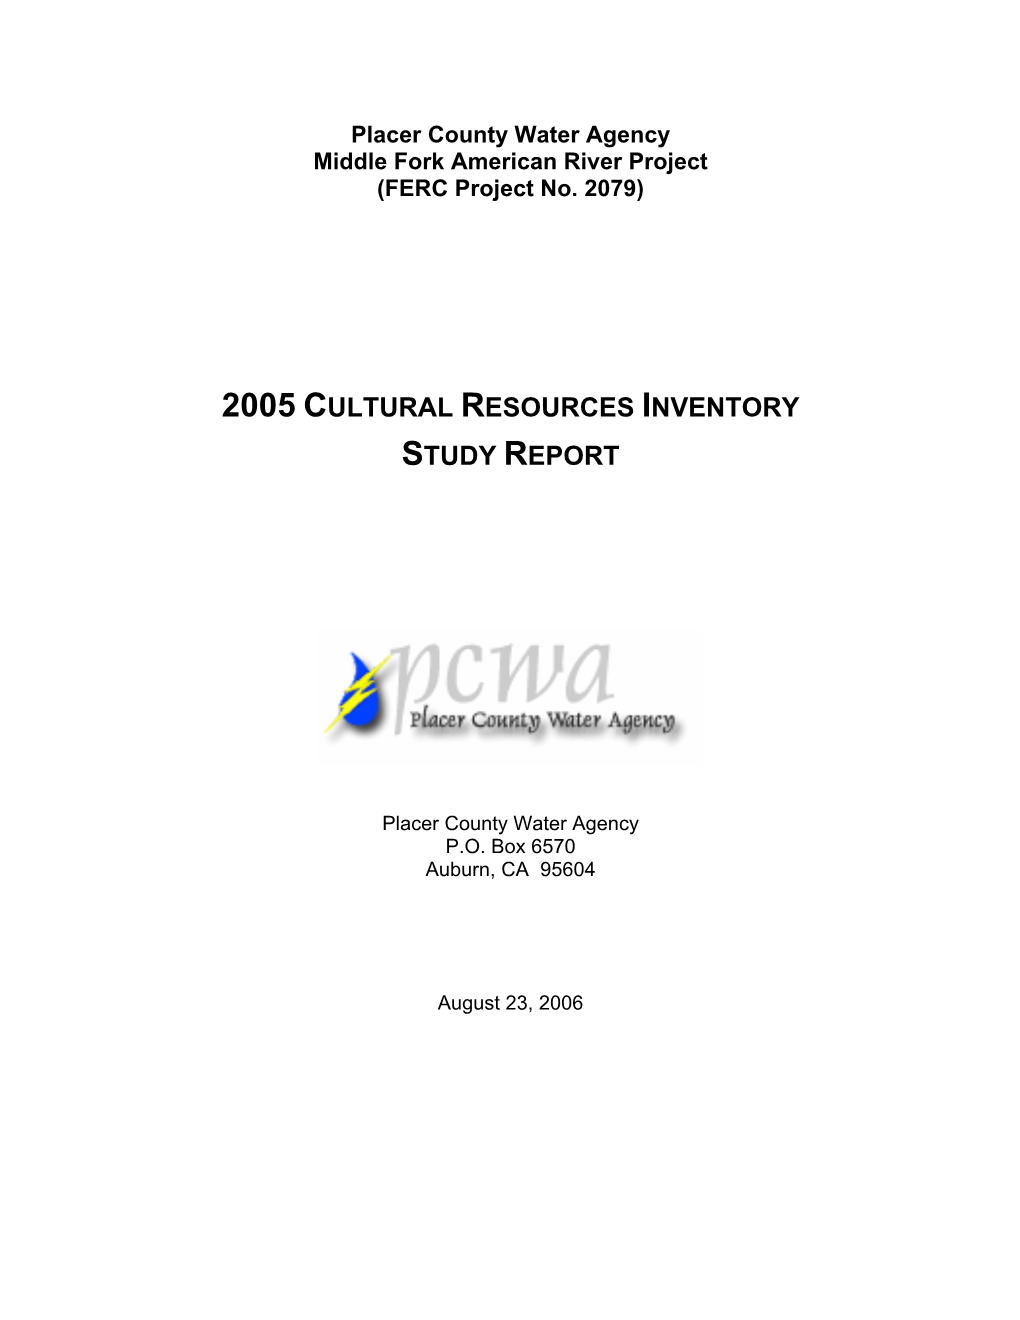 2005 Cultural Resources Inventory Study Report